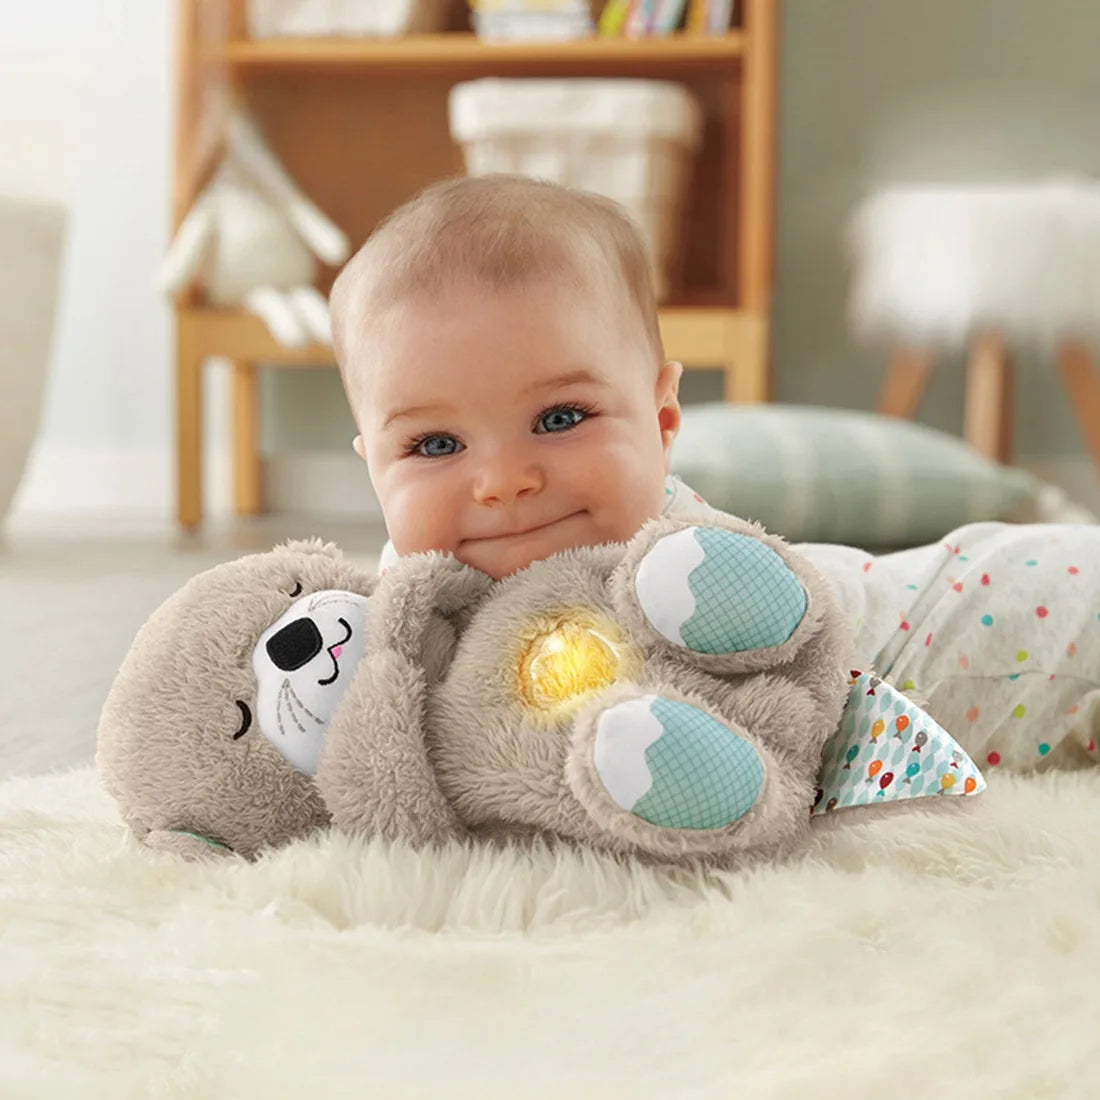 Breathing Otter Plush Toy Pet Cat Nap Sensory with Light and Sound Newborn Baby Gift Baby Musical Doll for Soothing Sleep